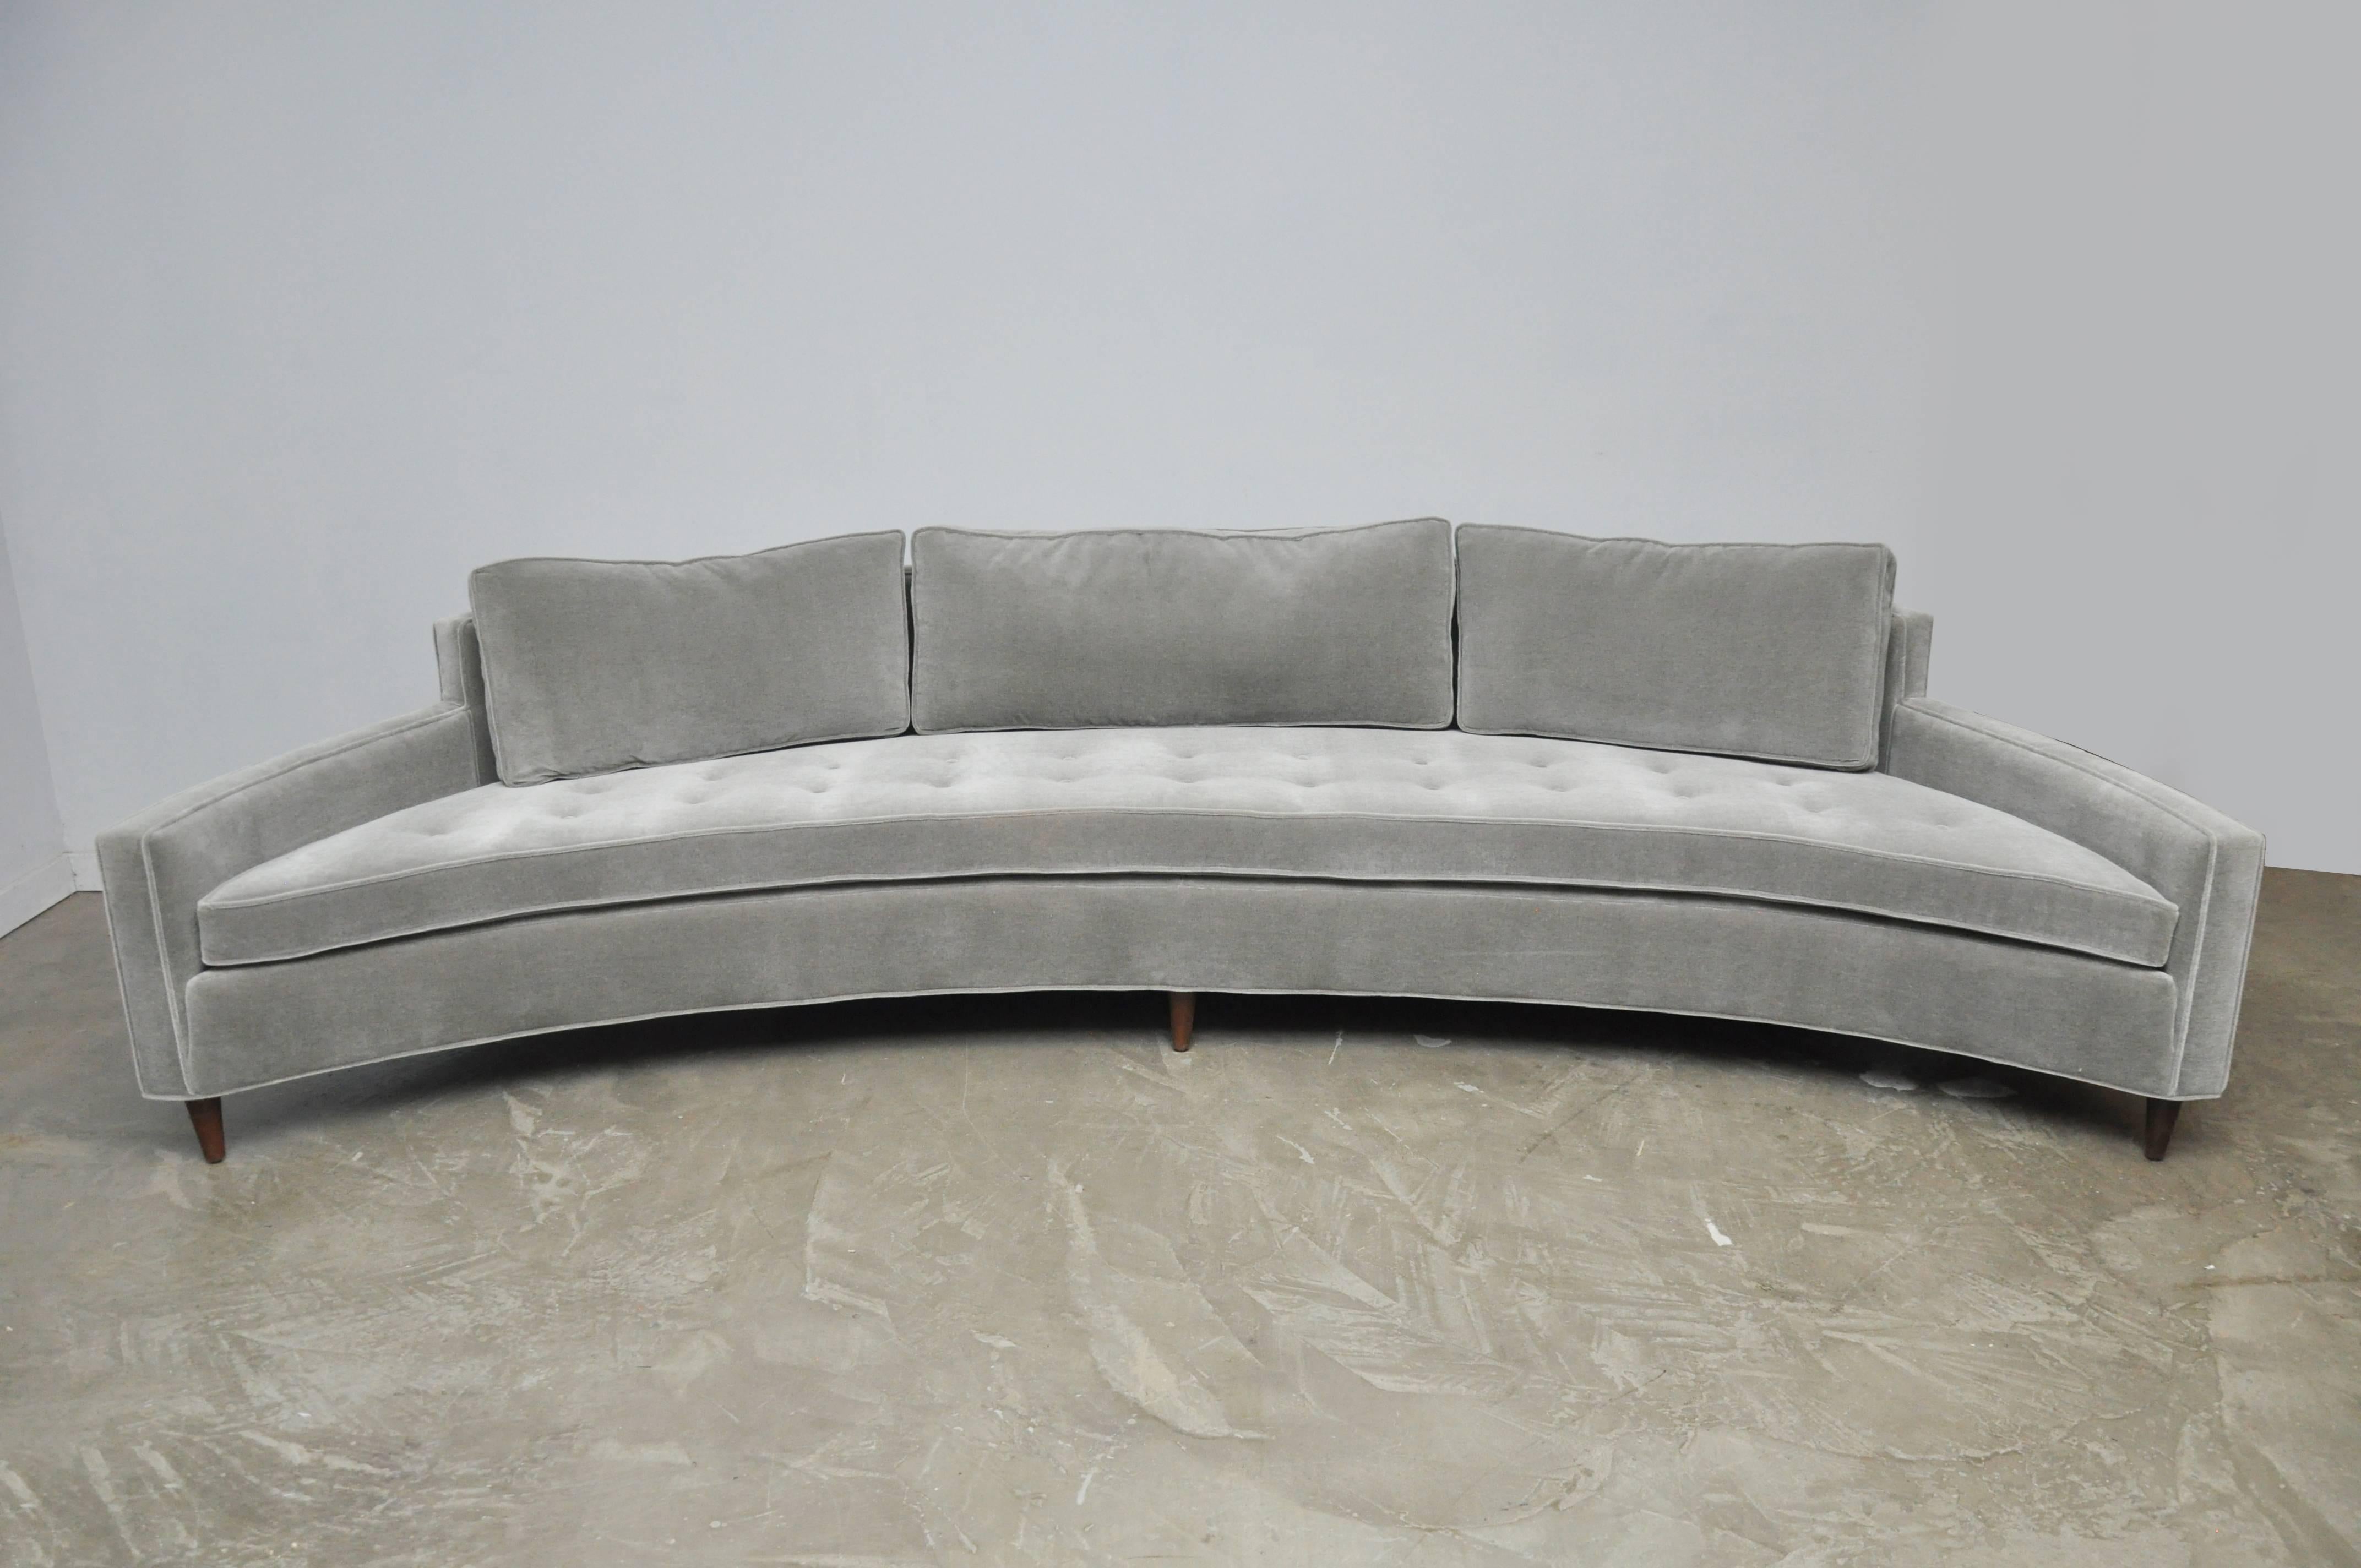 A large curved sofa designed by Harvey Probber. Fully restored. Reupholstered in smoke grey mohair over refinished espresso tone legs.